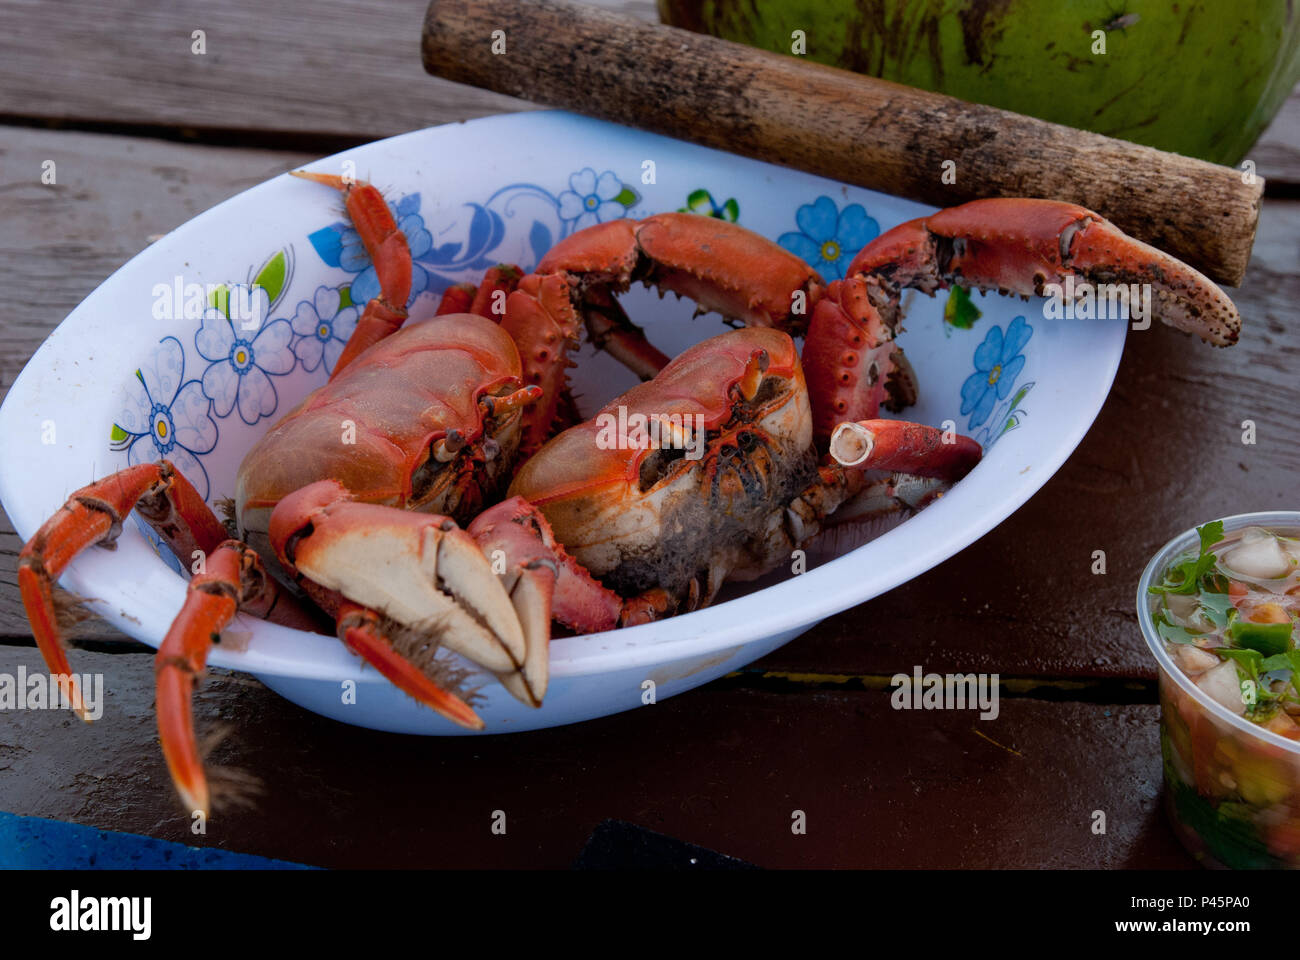 Aruana High Resolution Stock Photography And Images Alamy